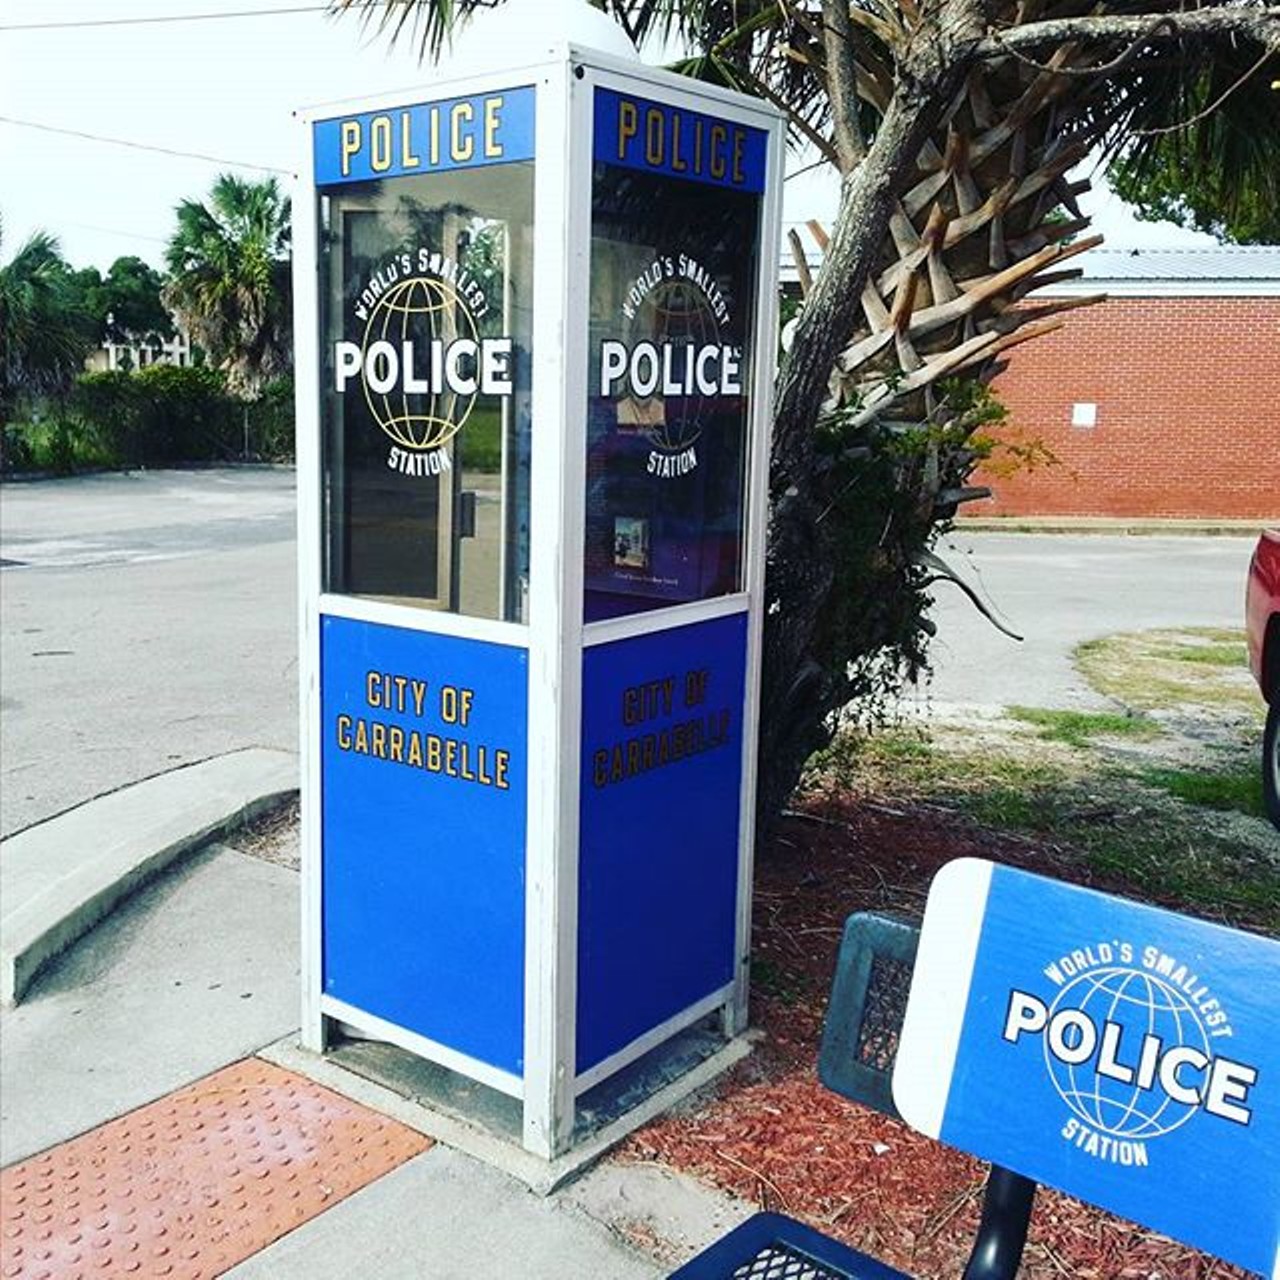 World's Smallest Police Station
1001 Gray Avenue, Carrabelle
Who knew that Florida was home to the world's smallest police station? Take a nice drive over to Carrabelle to witness its teeny cop headquarters.
Photo via dvdmc7 on Instagram